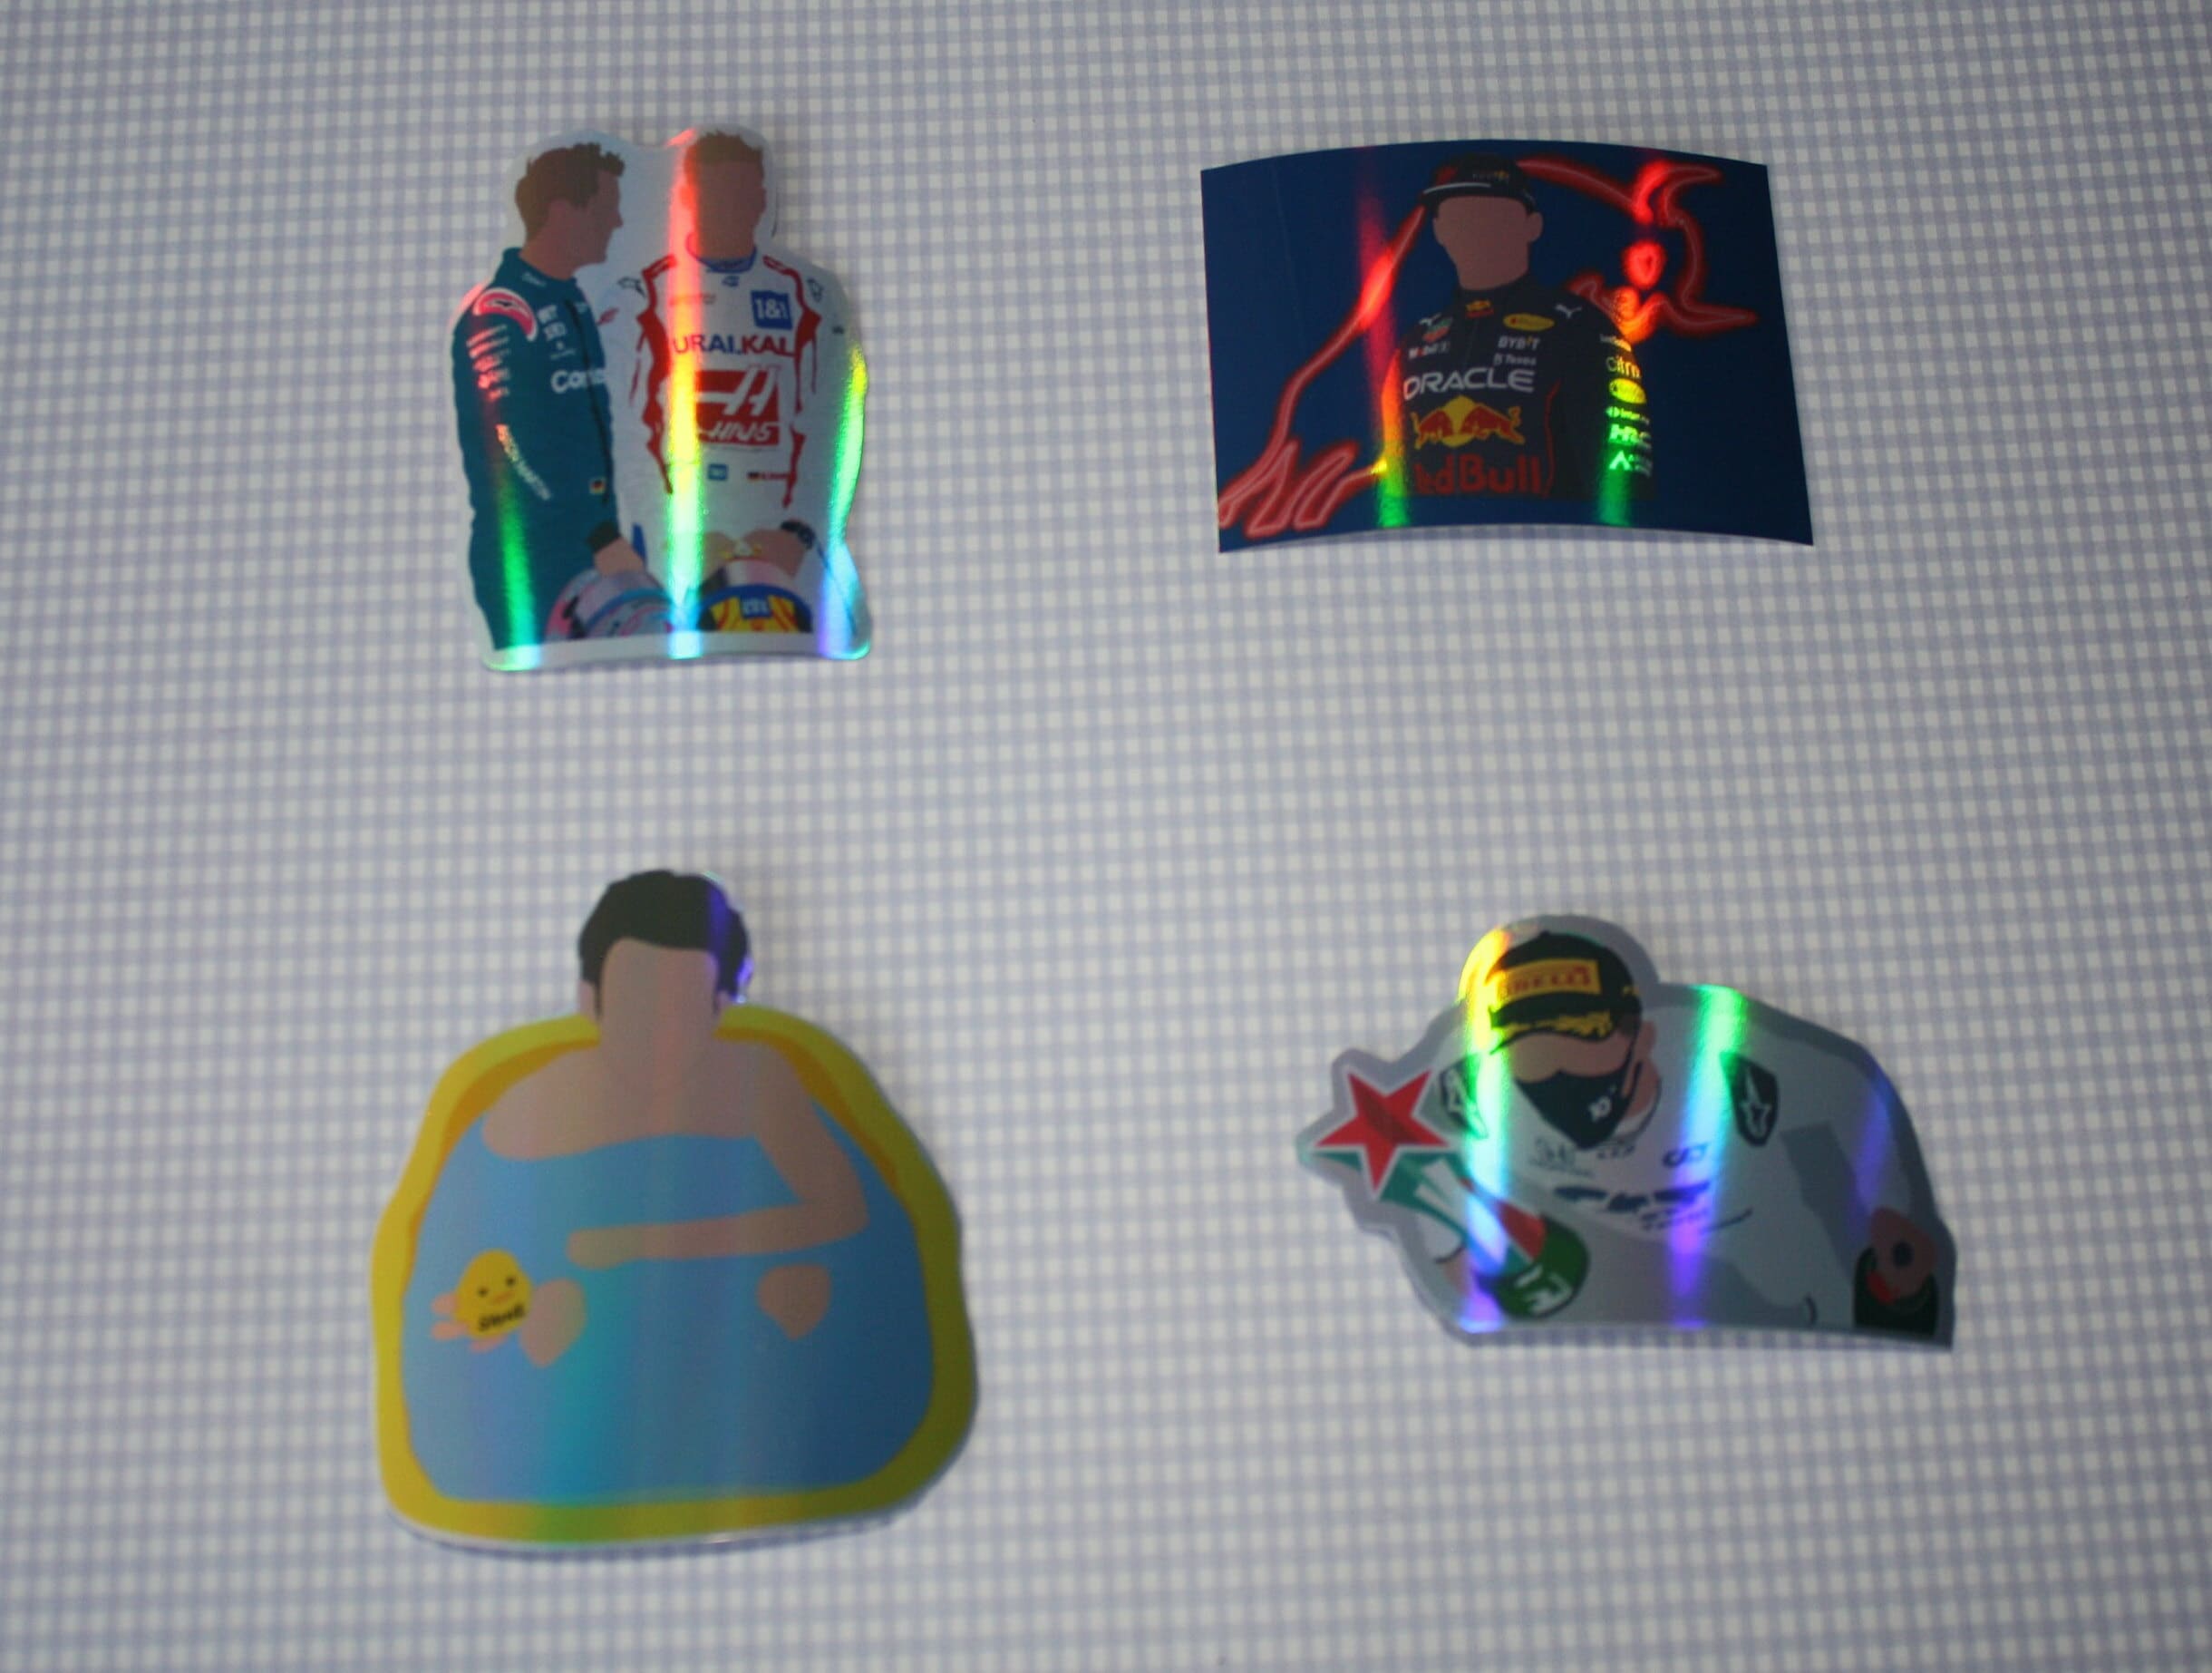 Holographic Red Bull Stickers